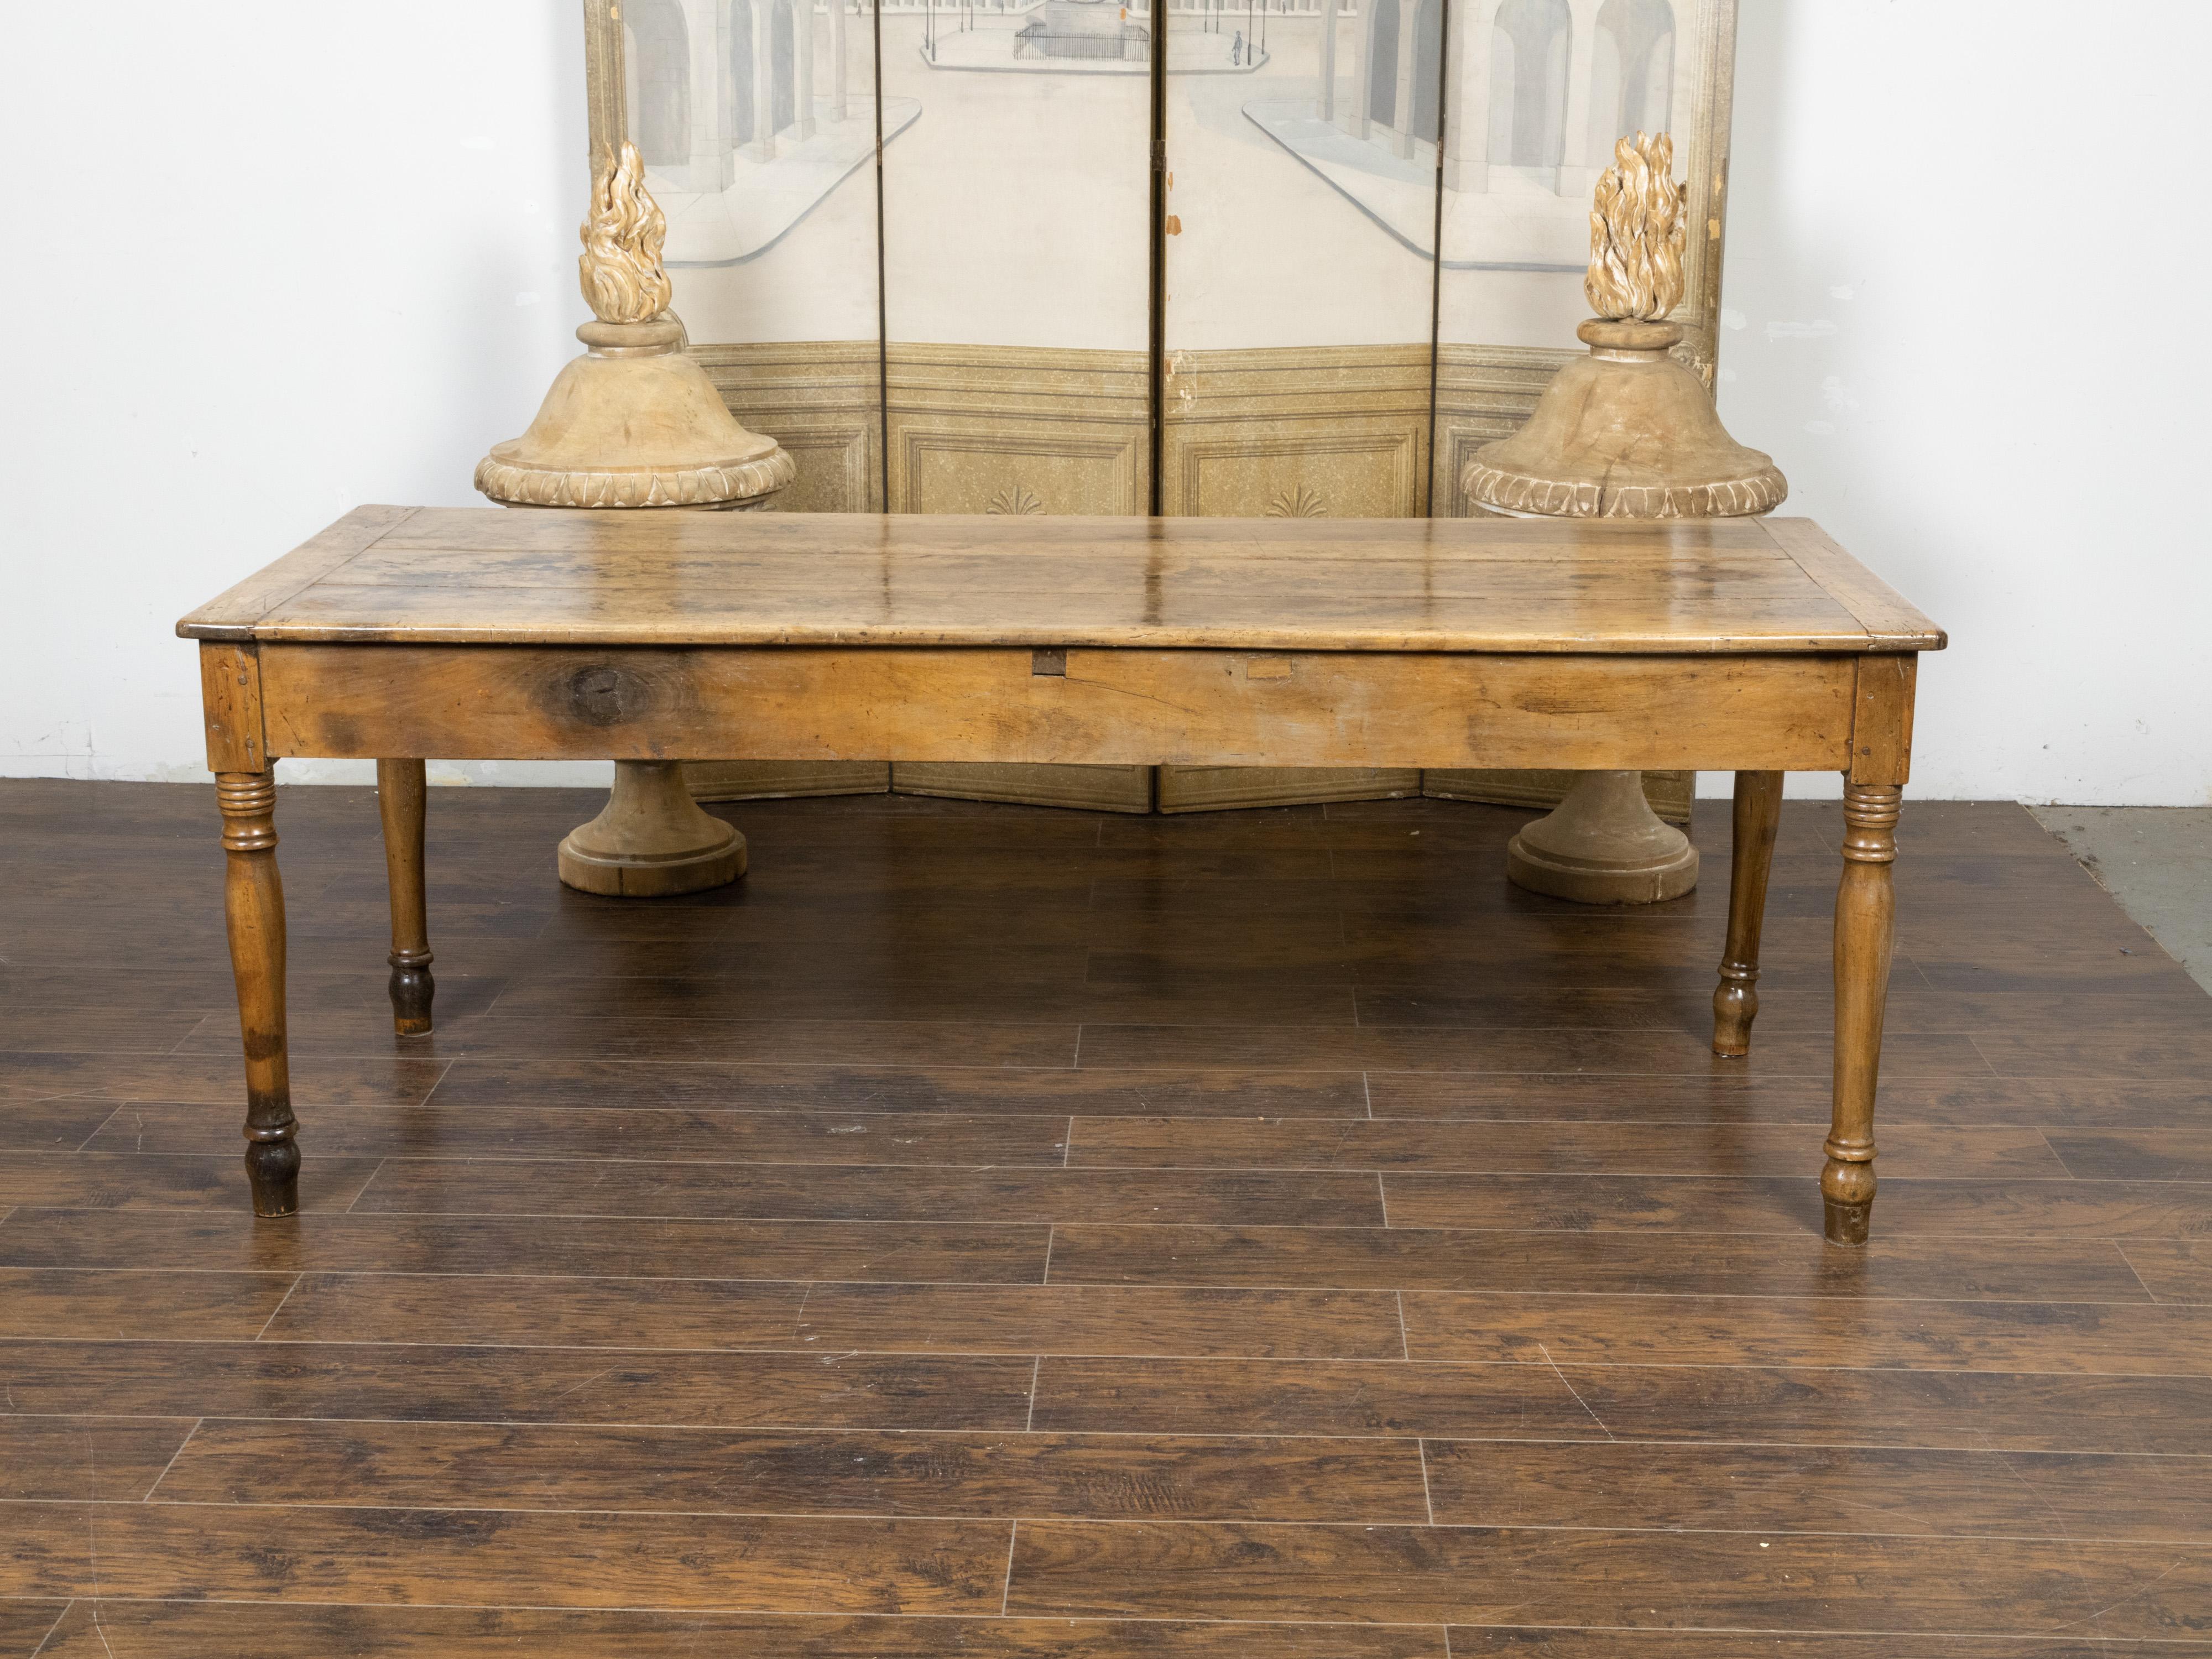 French 19th Century Walnut Farm Table with Turned Legs and Distressed Patina For Sale 7